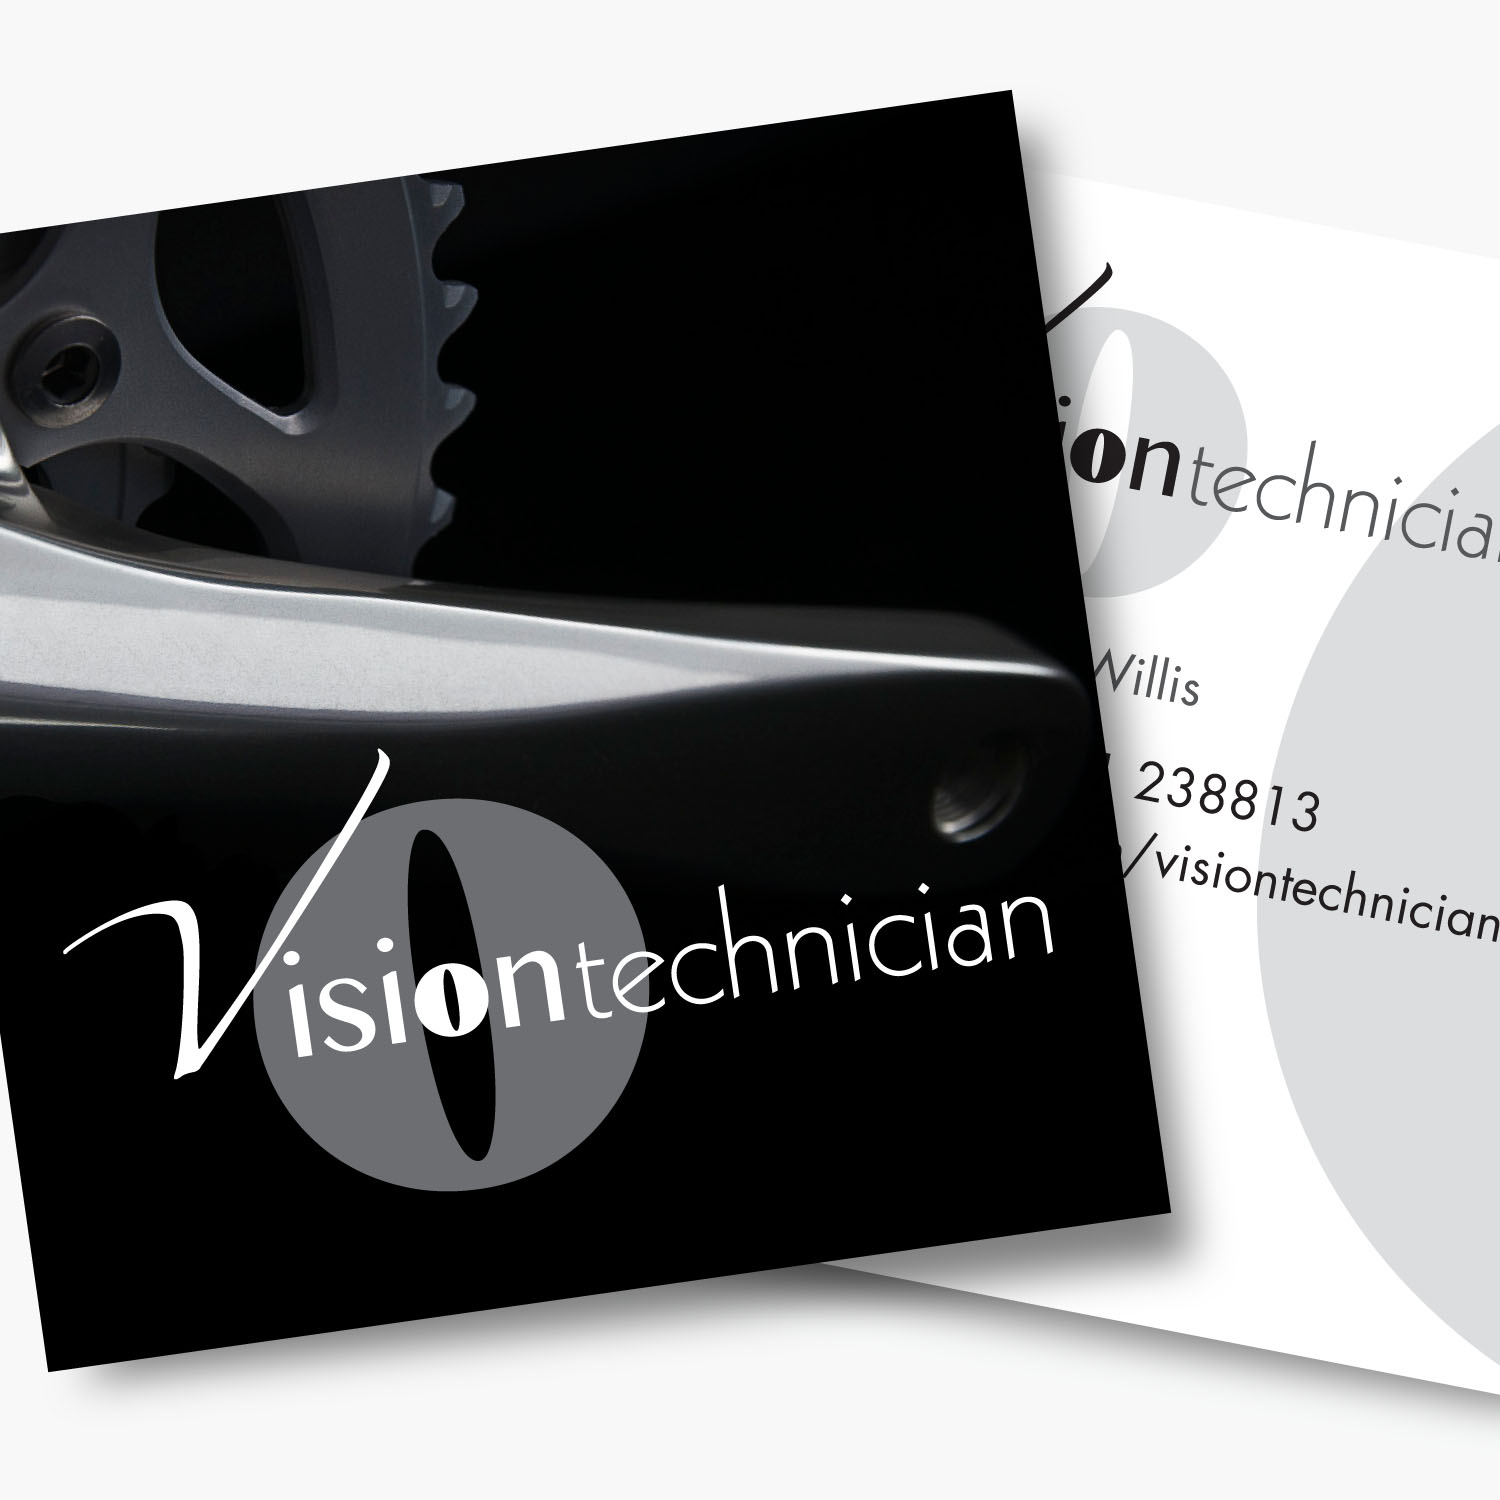  Brand identity and business stationery for Vision Technician  